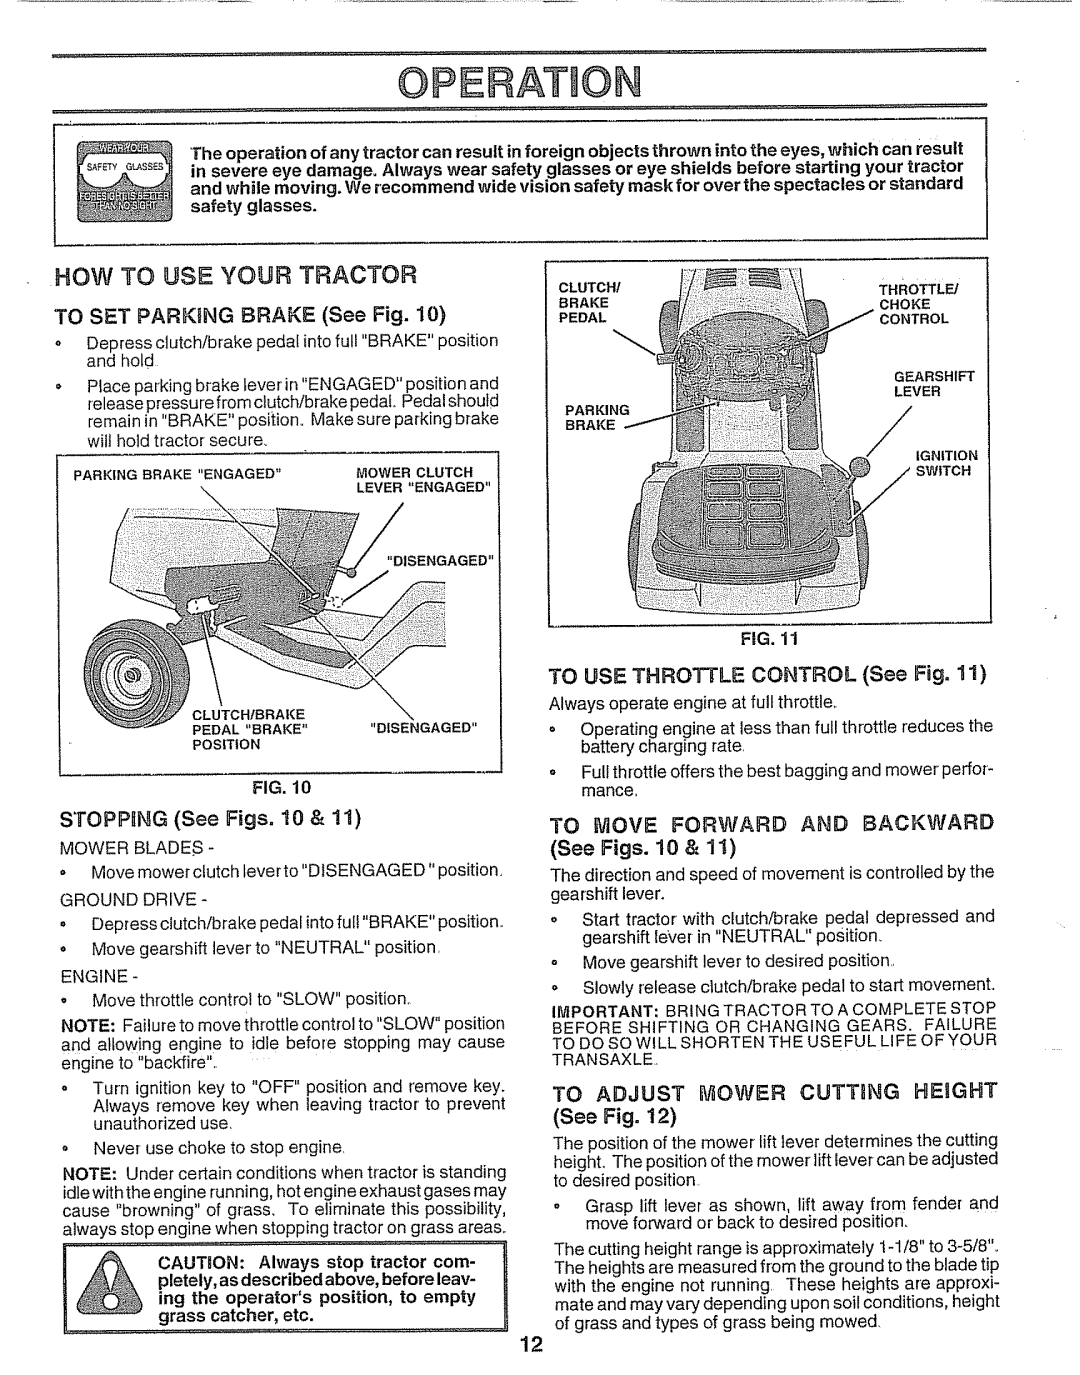 Craftsman 917.25693 owner manual Operation, How To Use Your Tractor, TO SET PARKING BRAKE See Fig, STOPPRNG See Figs, 10 